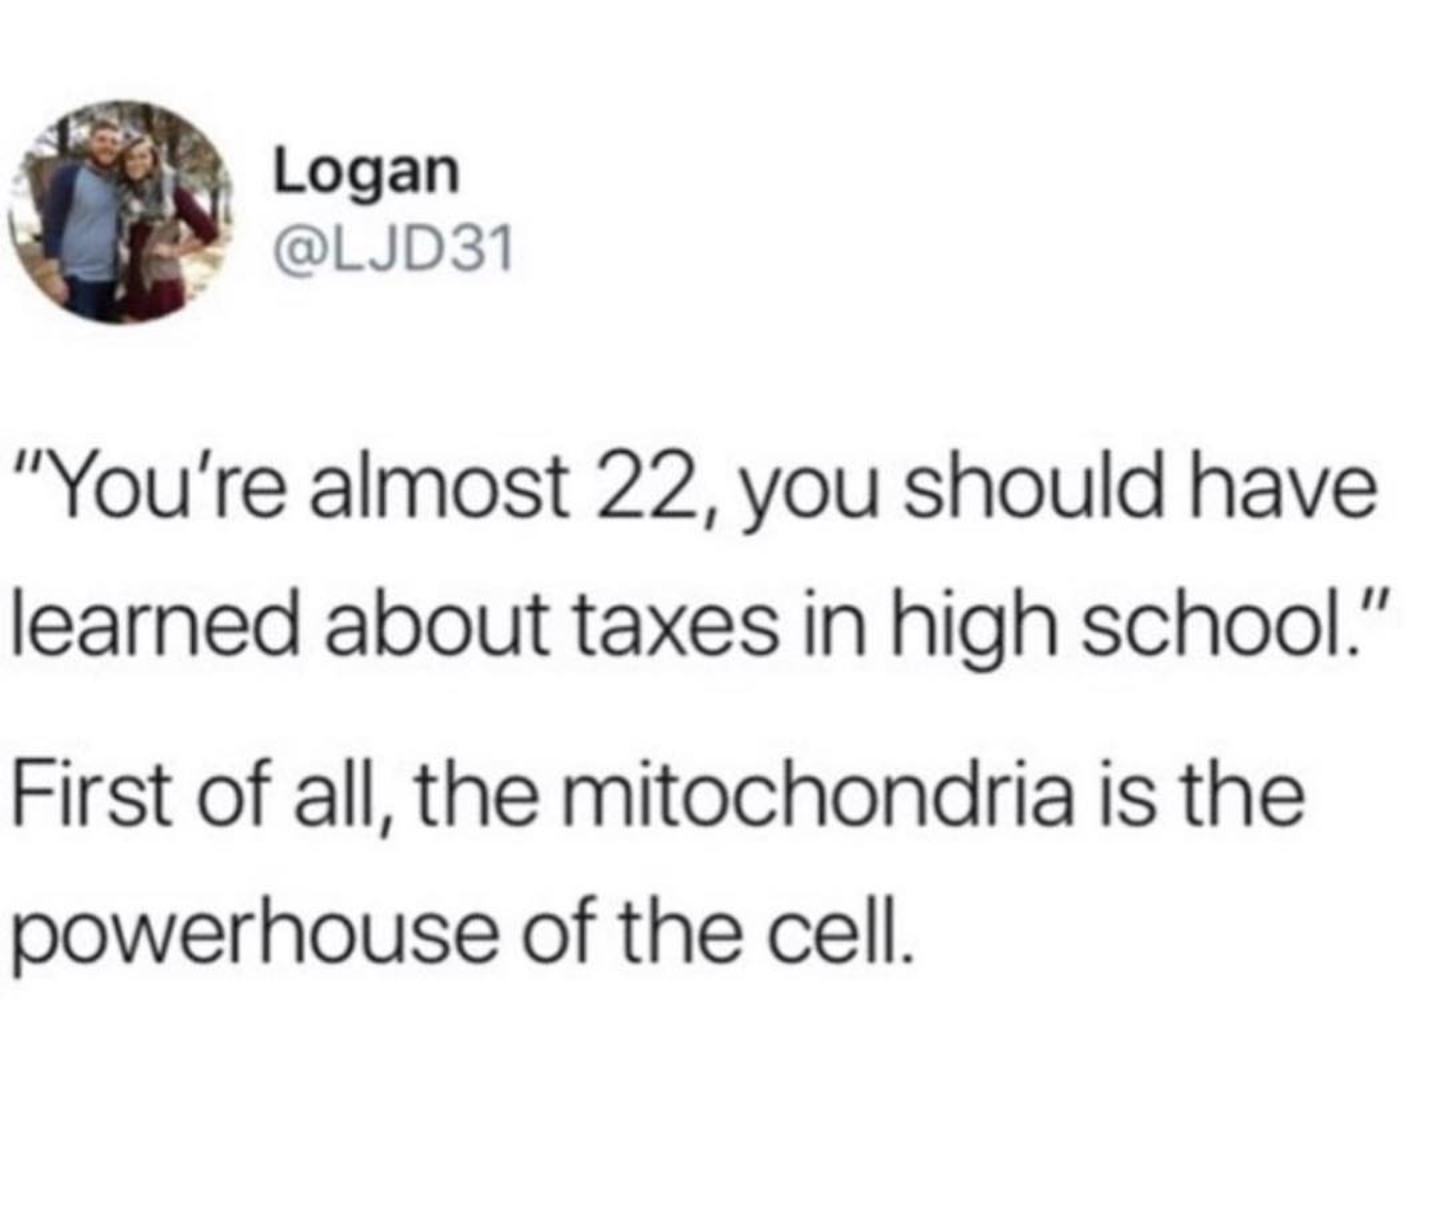 white people love memes - Logan "You're almost 22, you should have learned about taxes in high school." First of all, the mitochondria is the powerhouse of the cell.